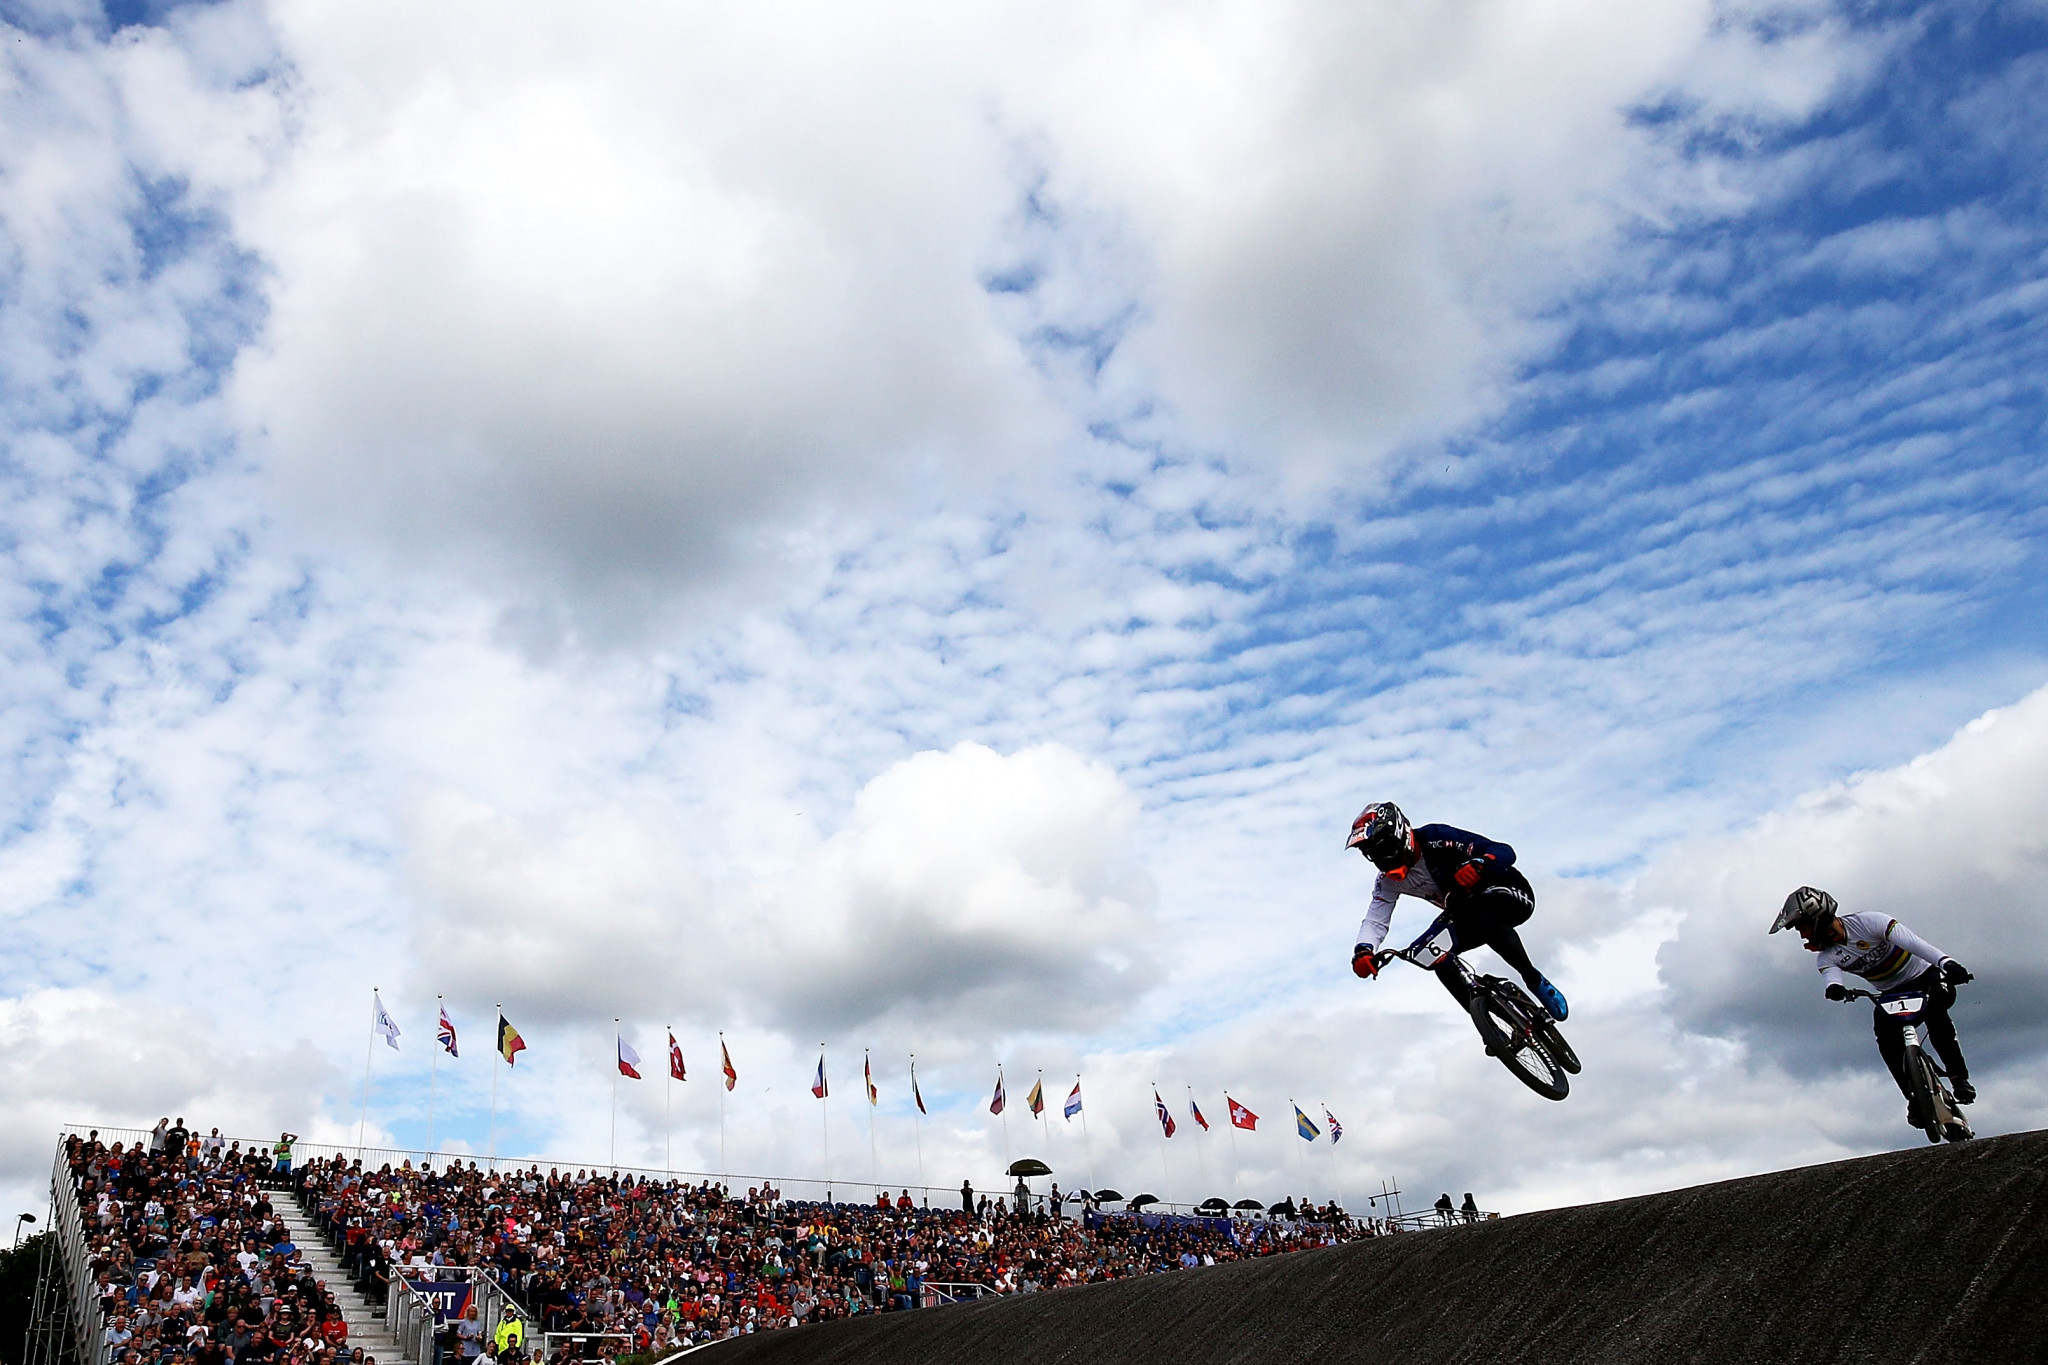 Evans and Smulders out to retain titles at BMX European Championships